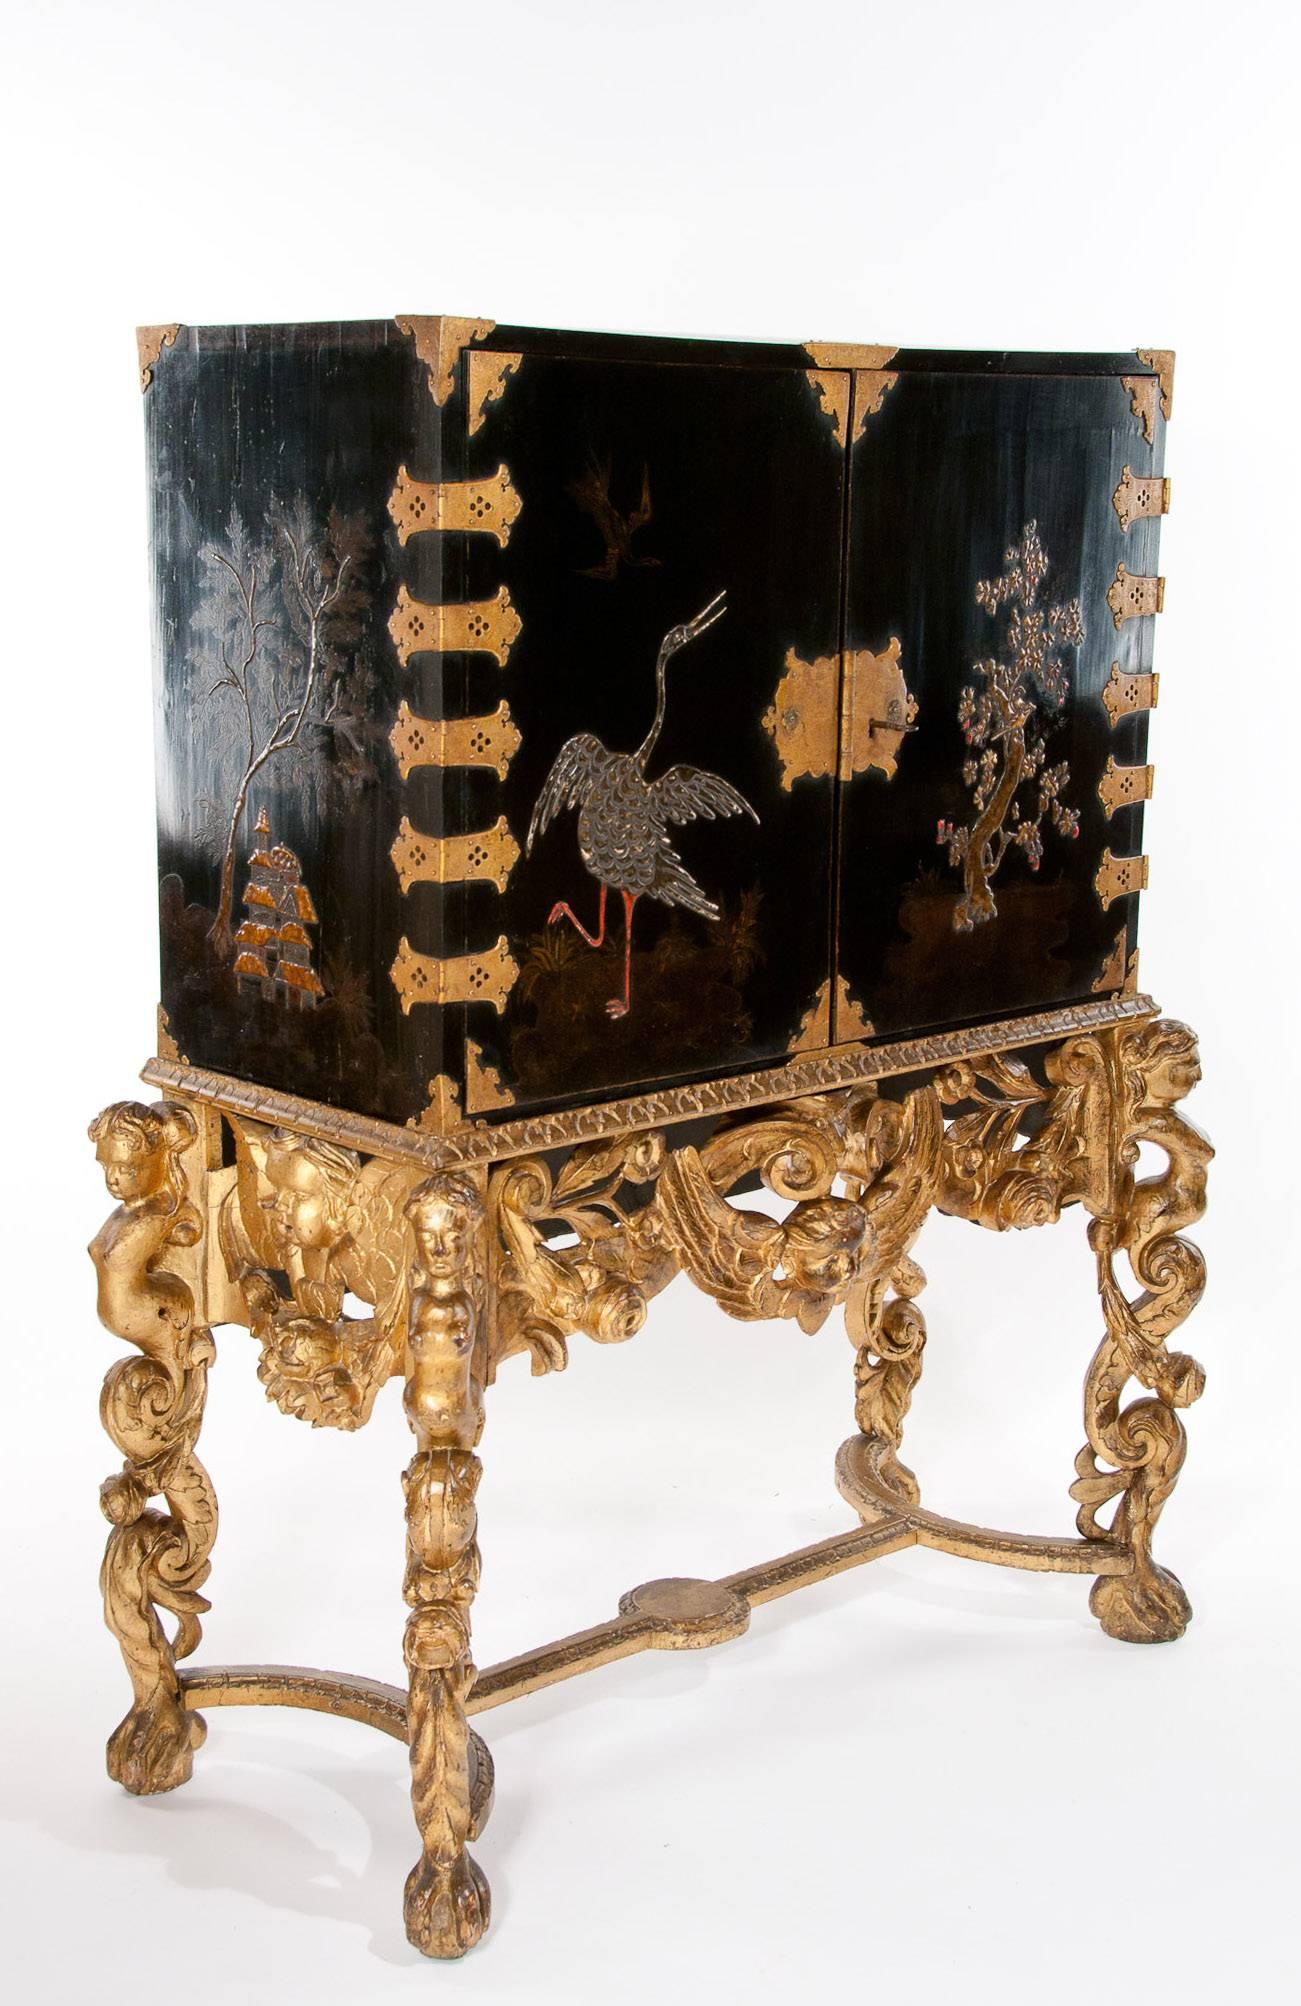 A magnificent 17Th / 18Th Century and later English Japanned Lacquer Cabinet on Gilt carved Stand. This extremely rare cabinet would have been used in the late 17Th Century and early 18Th century as means to show off a wealthy noblemen's exotic